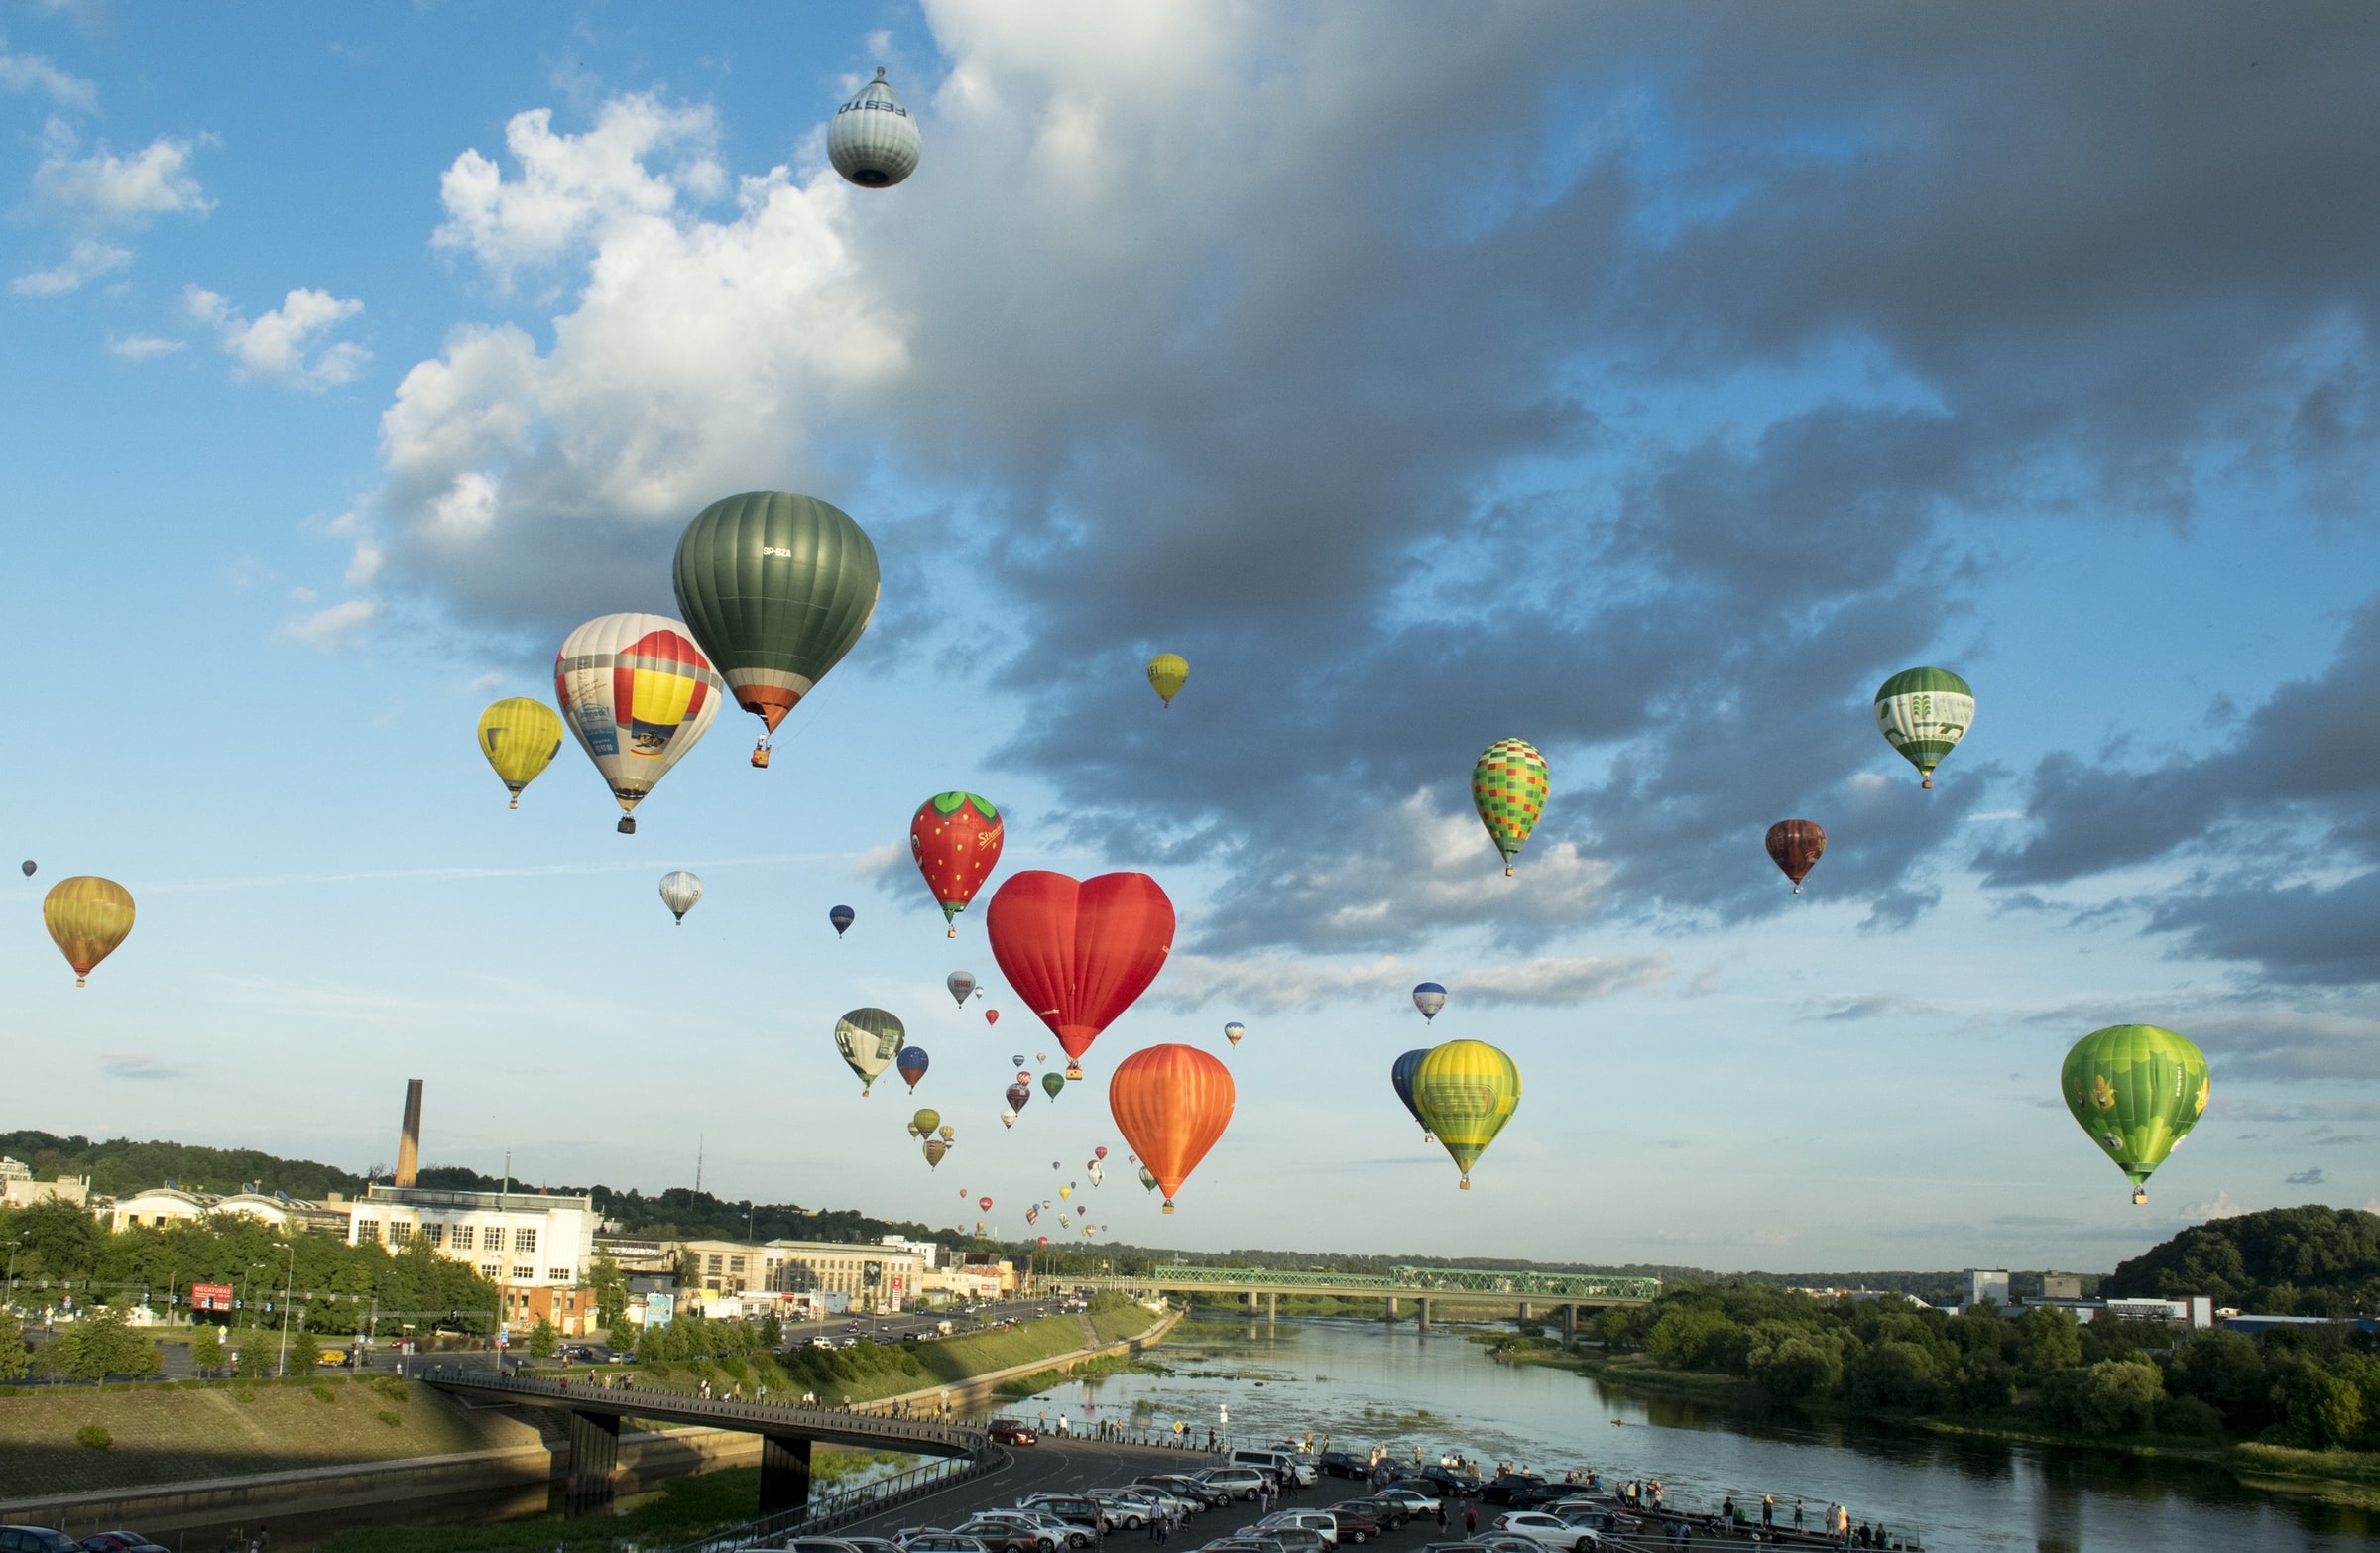 Photography of hot air balloons in the sky